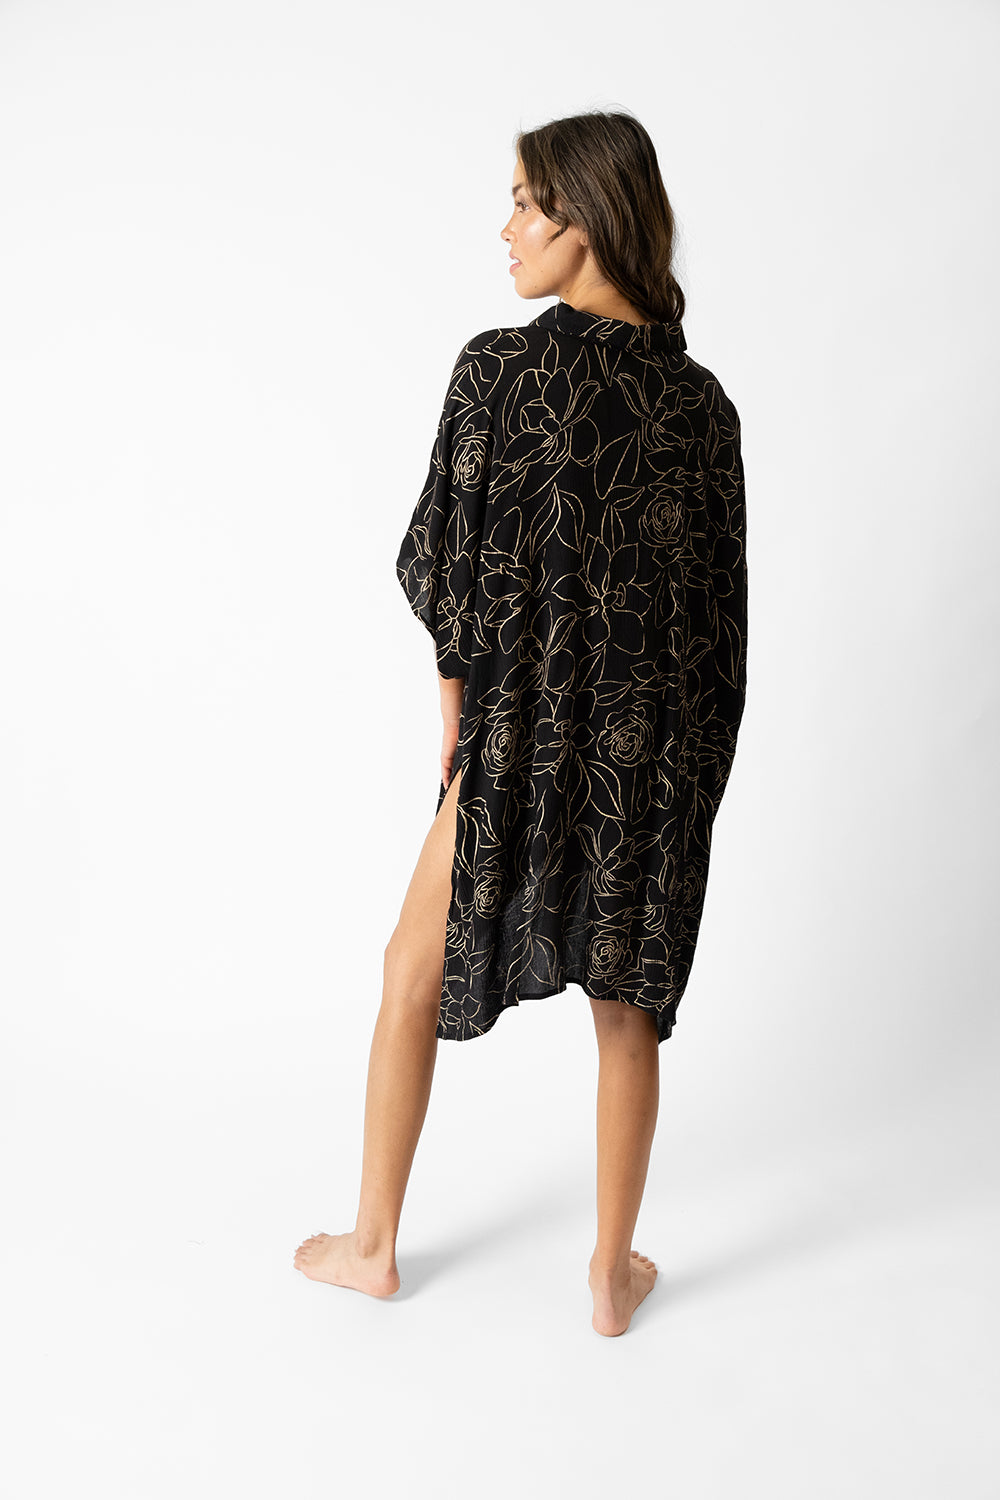 koy resort miami shine big shirt dress in midnight black featuring an abstract gold flower print for spring 2024 women's resort wear collection